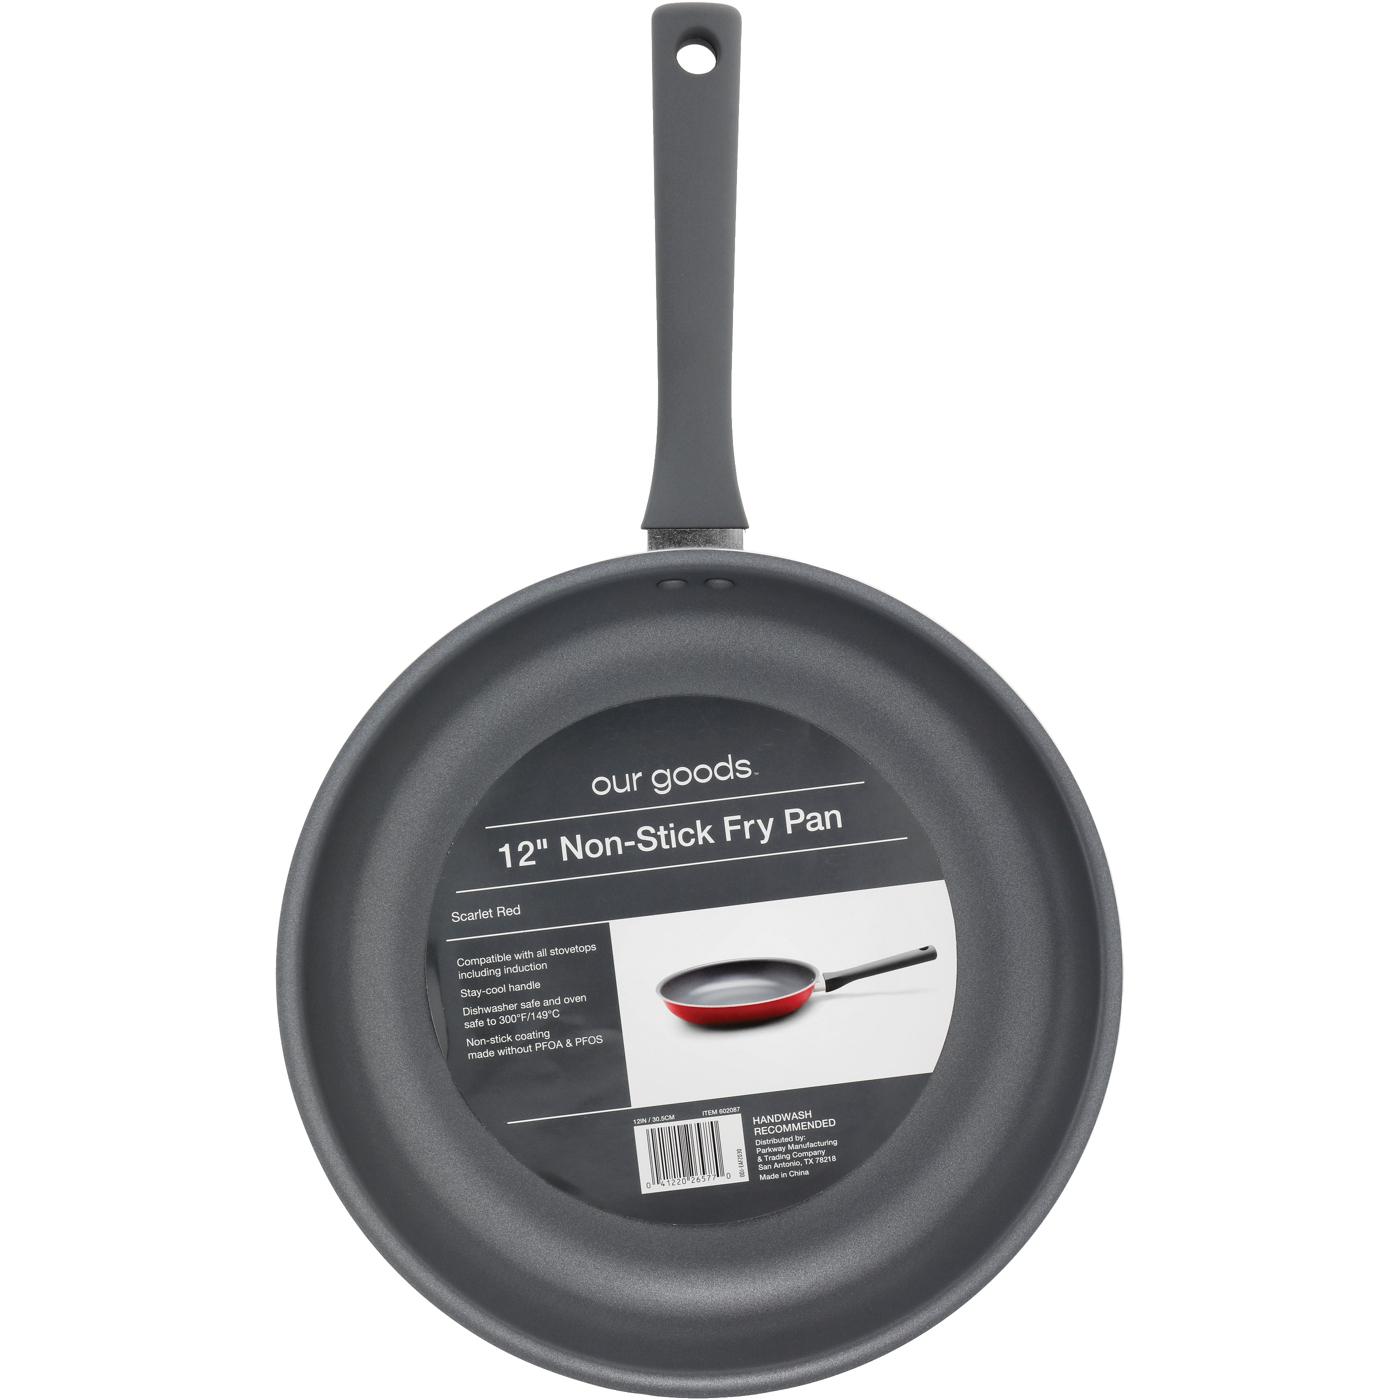 our goods Non-Stick Fry Pan - Scarlet Red; image 2 of 2